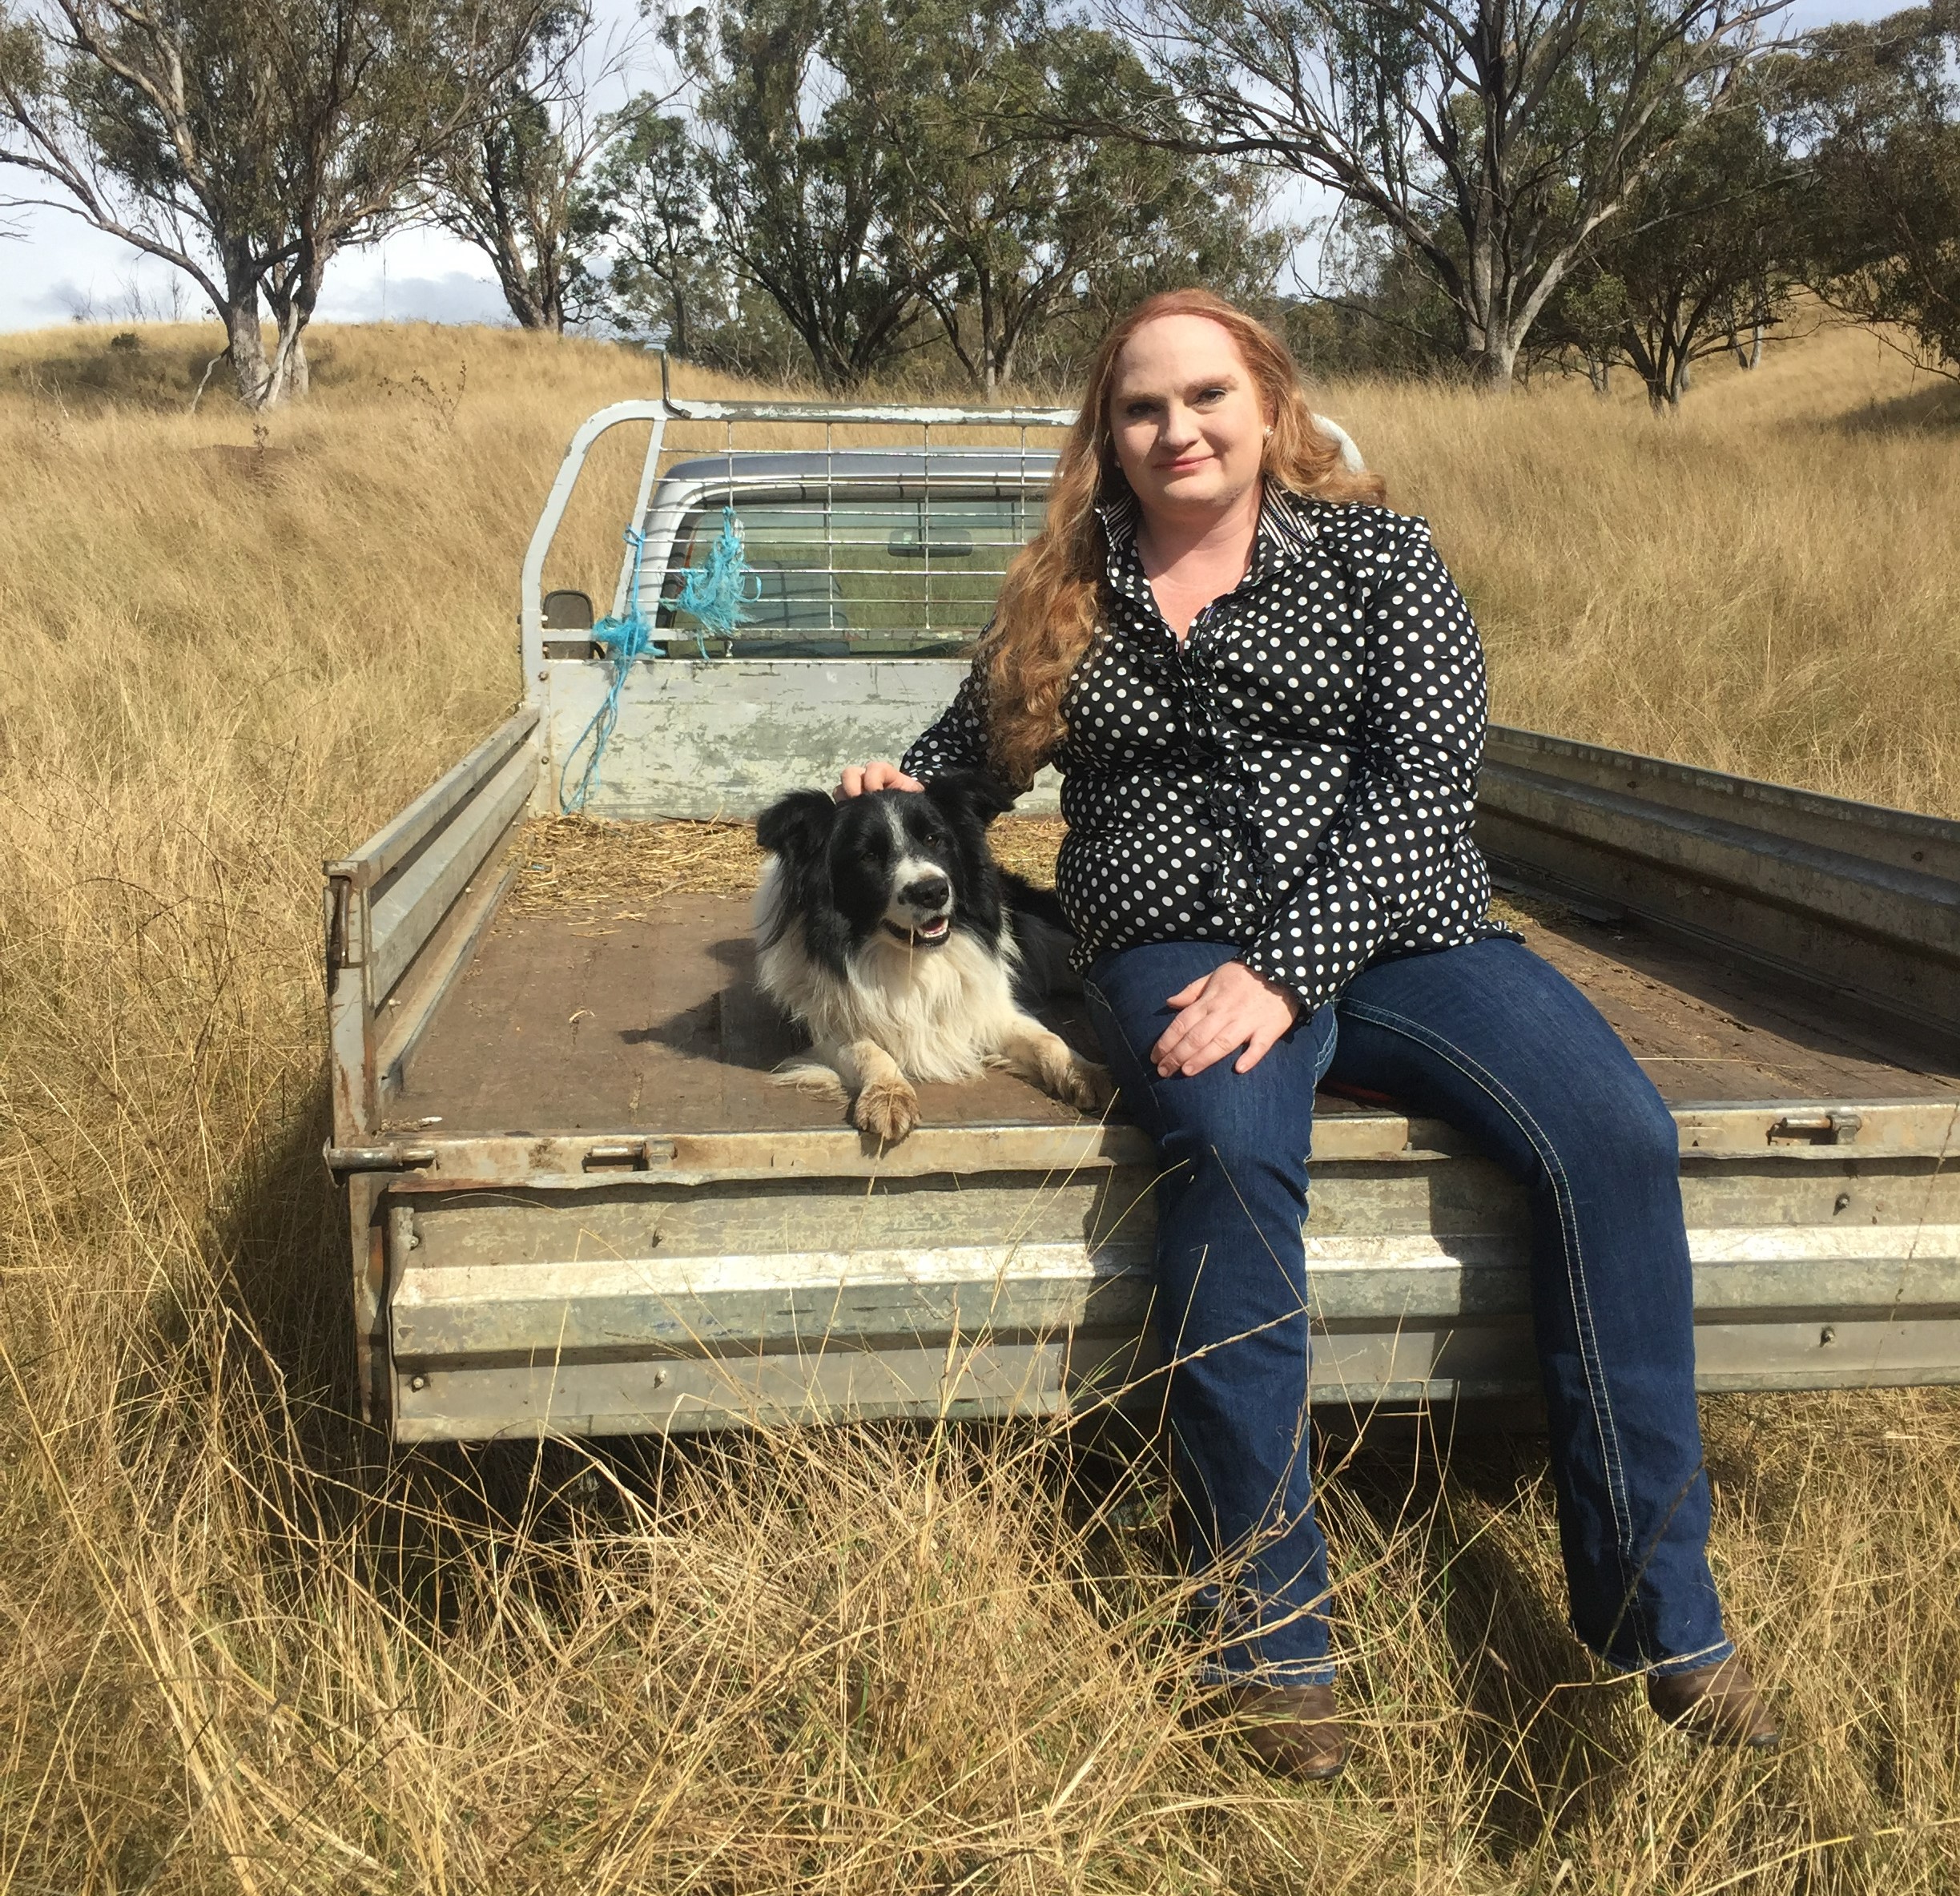 Boots on the ground: Meet NSW Farmers member Rolanda